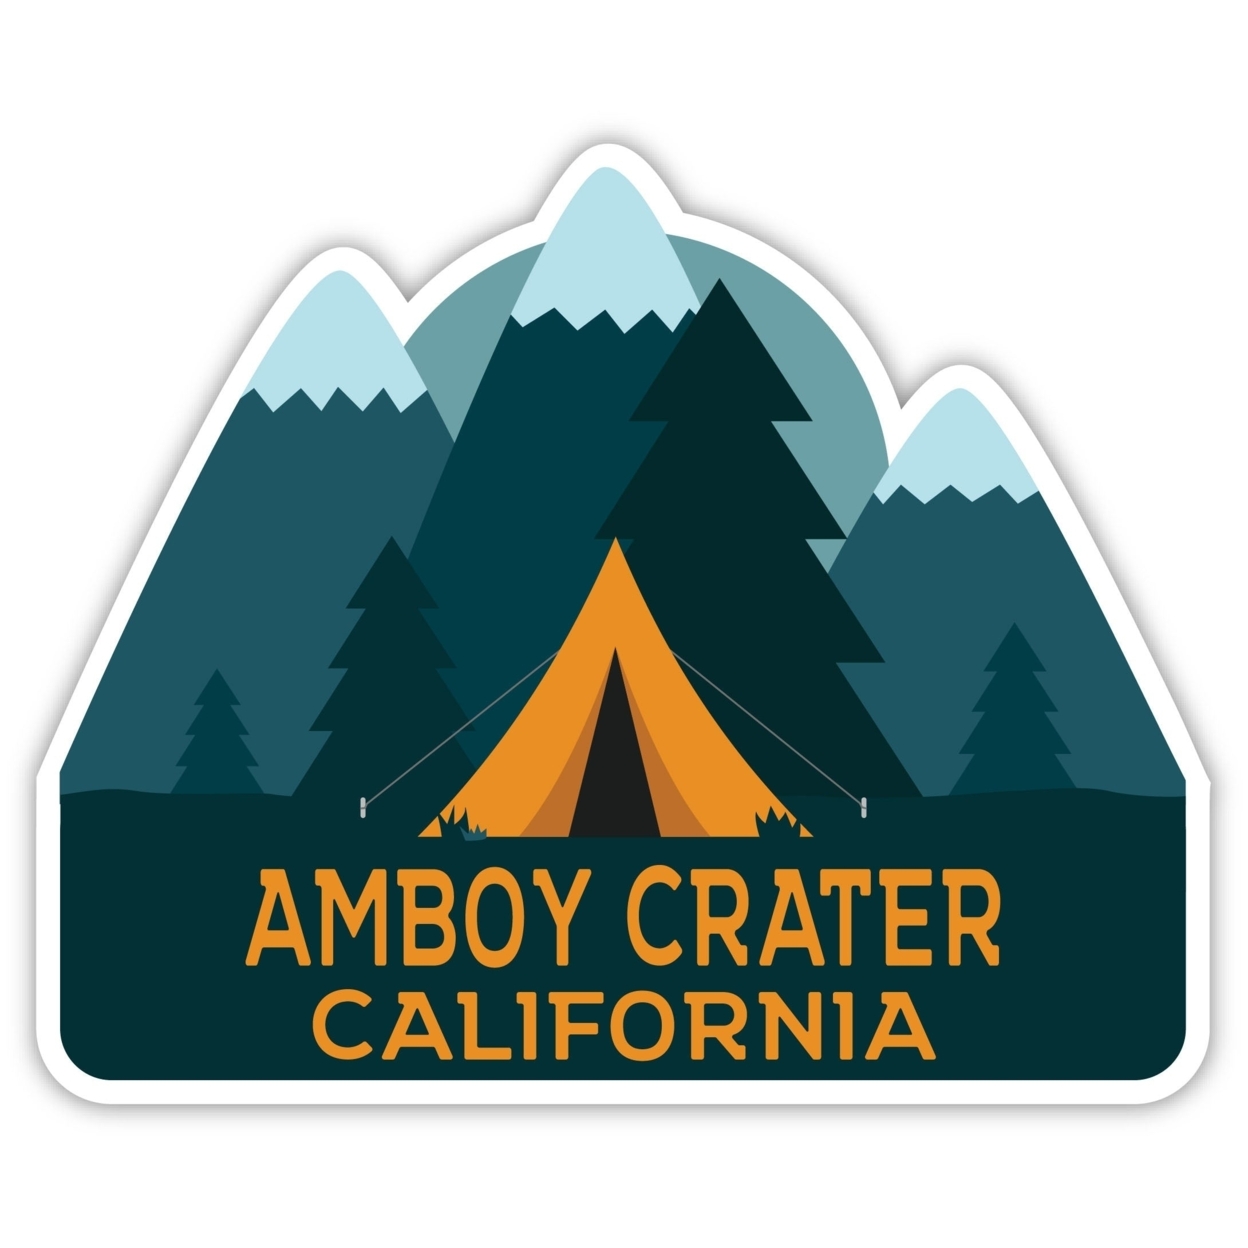 Amboy Crater California Souvenir Decorative Stickers (Choose Theme And Size) - 4-Pack, 4-Inch, Tent